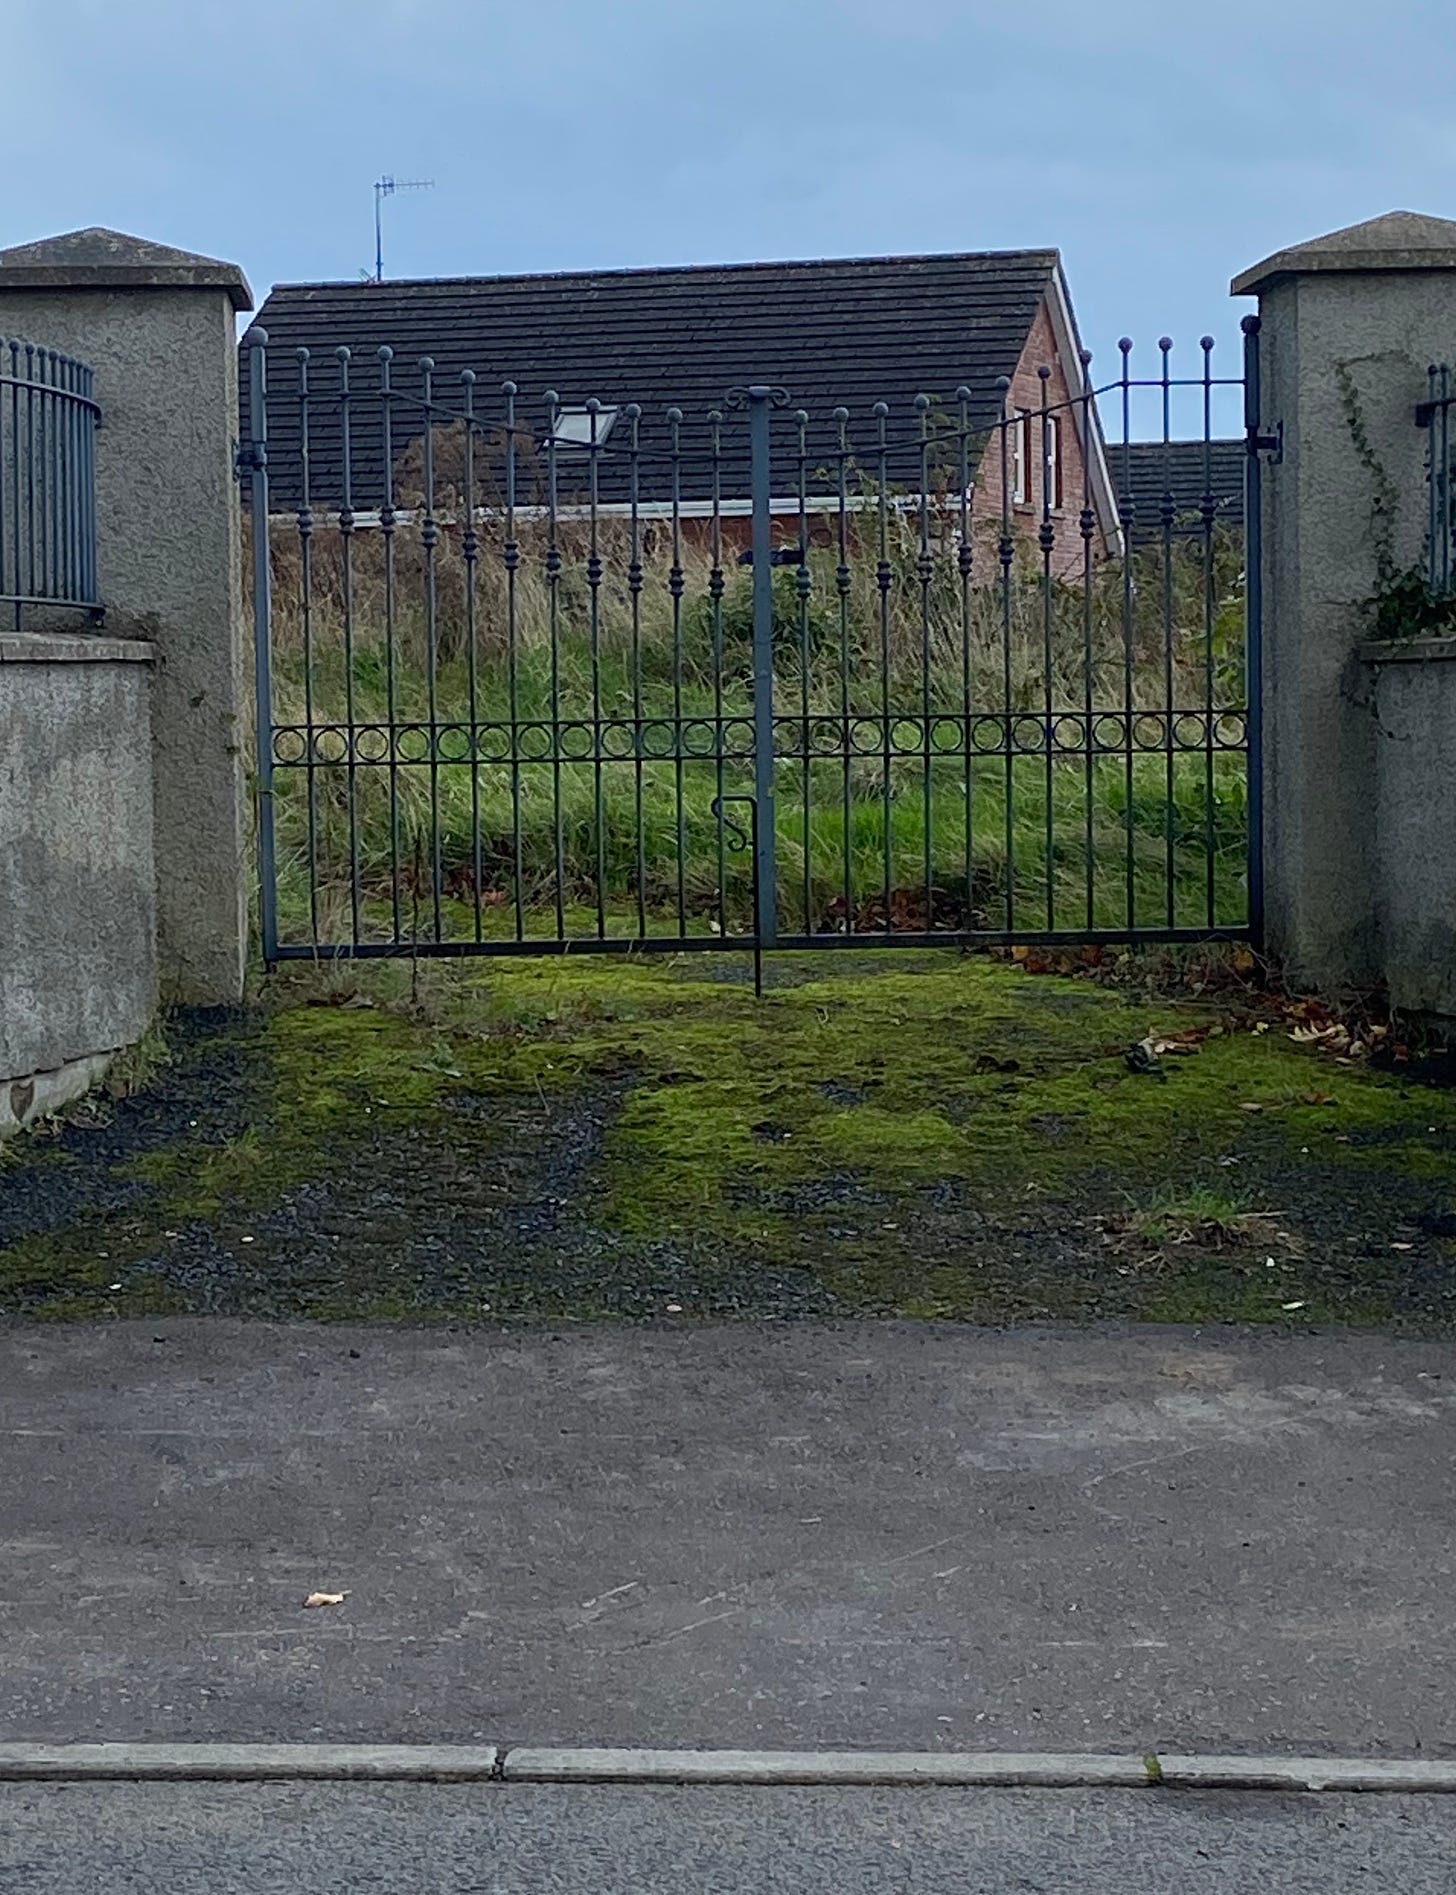 A closed gate with wild grasses and a house in the background